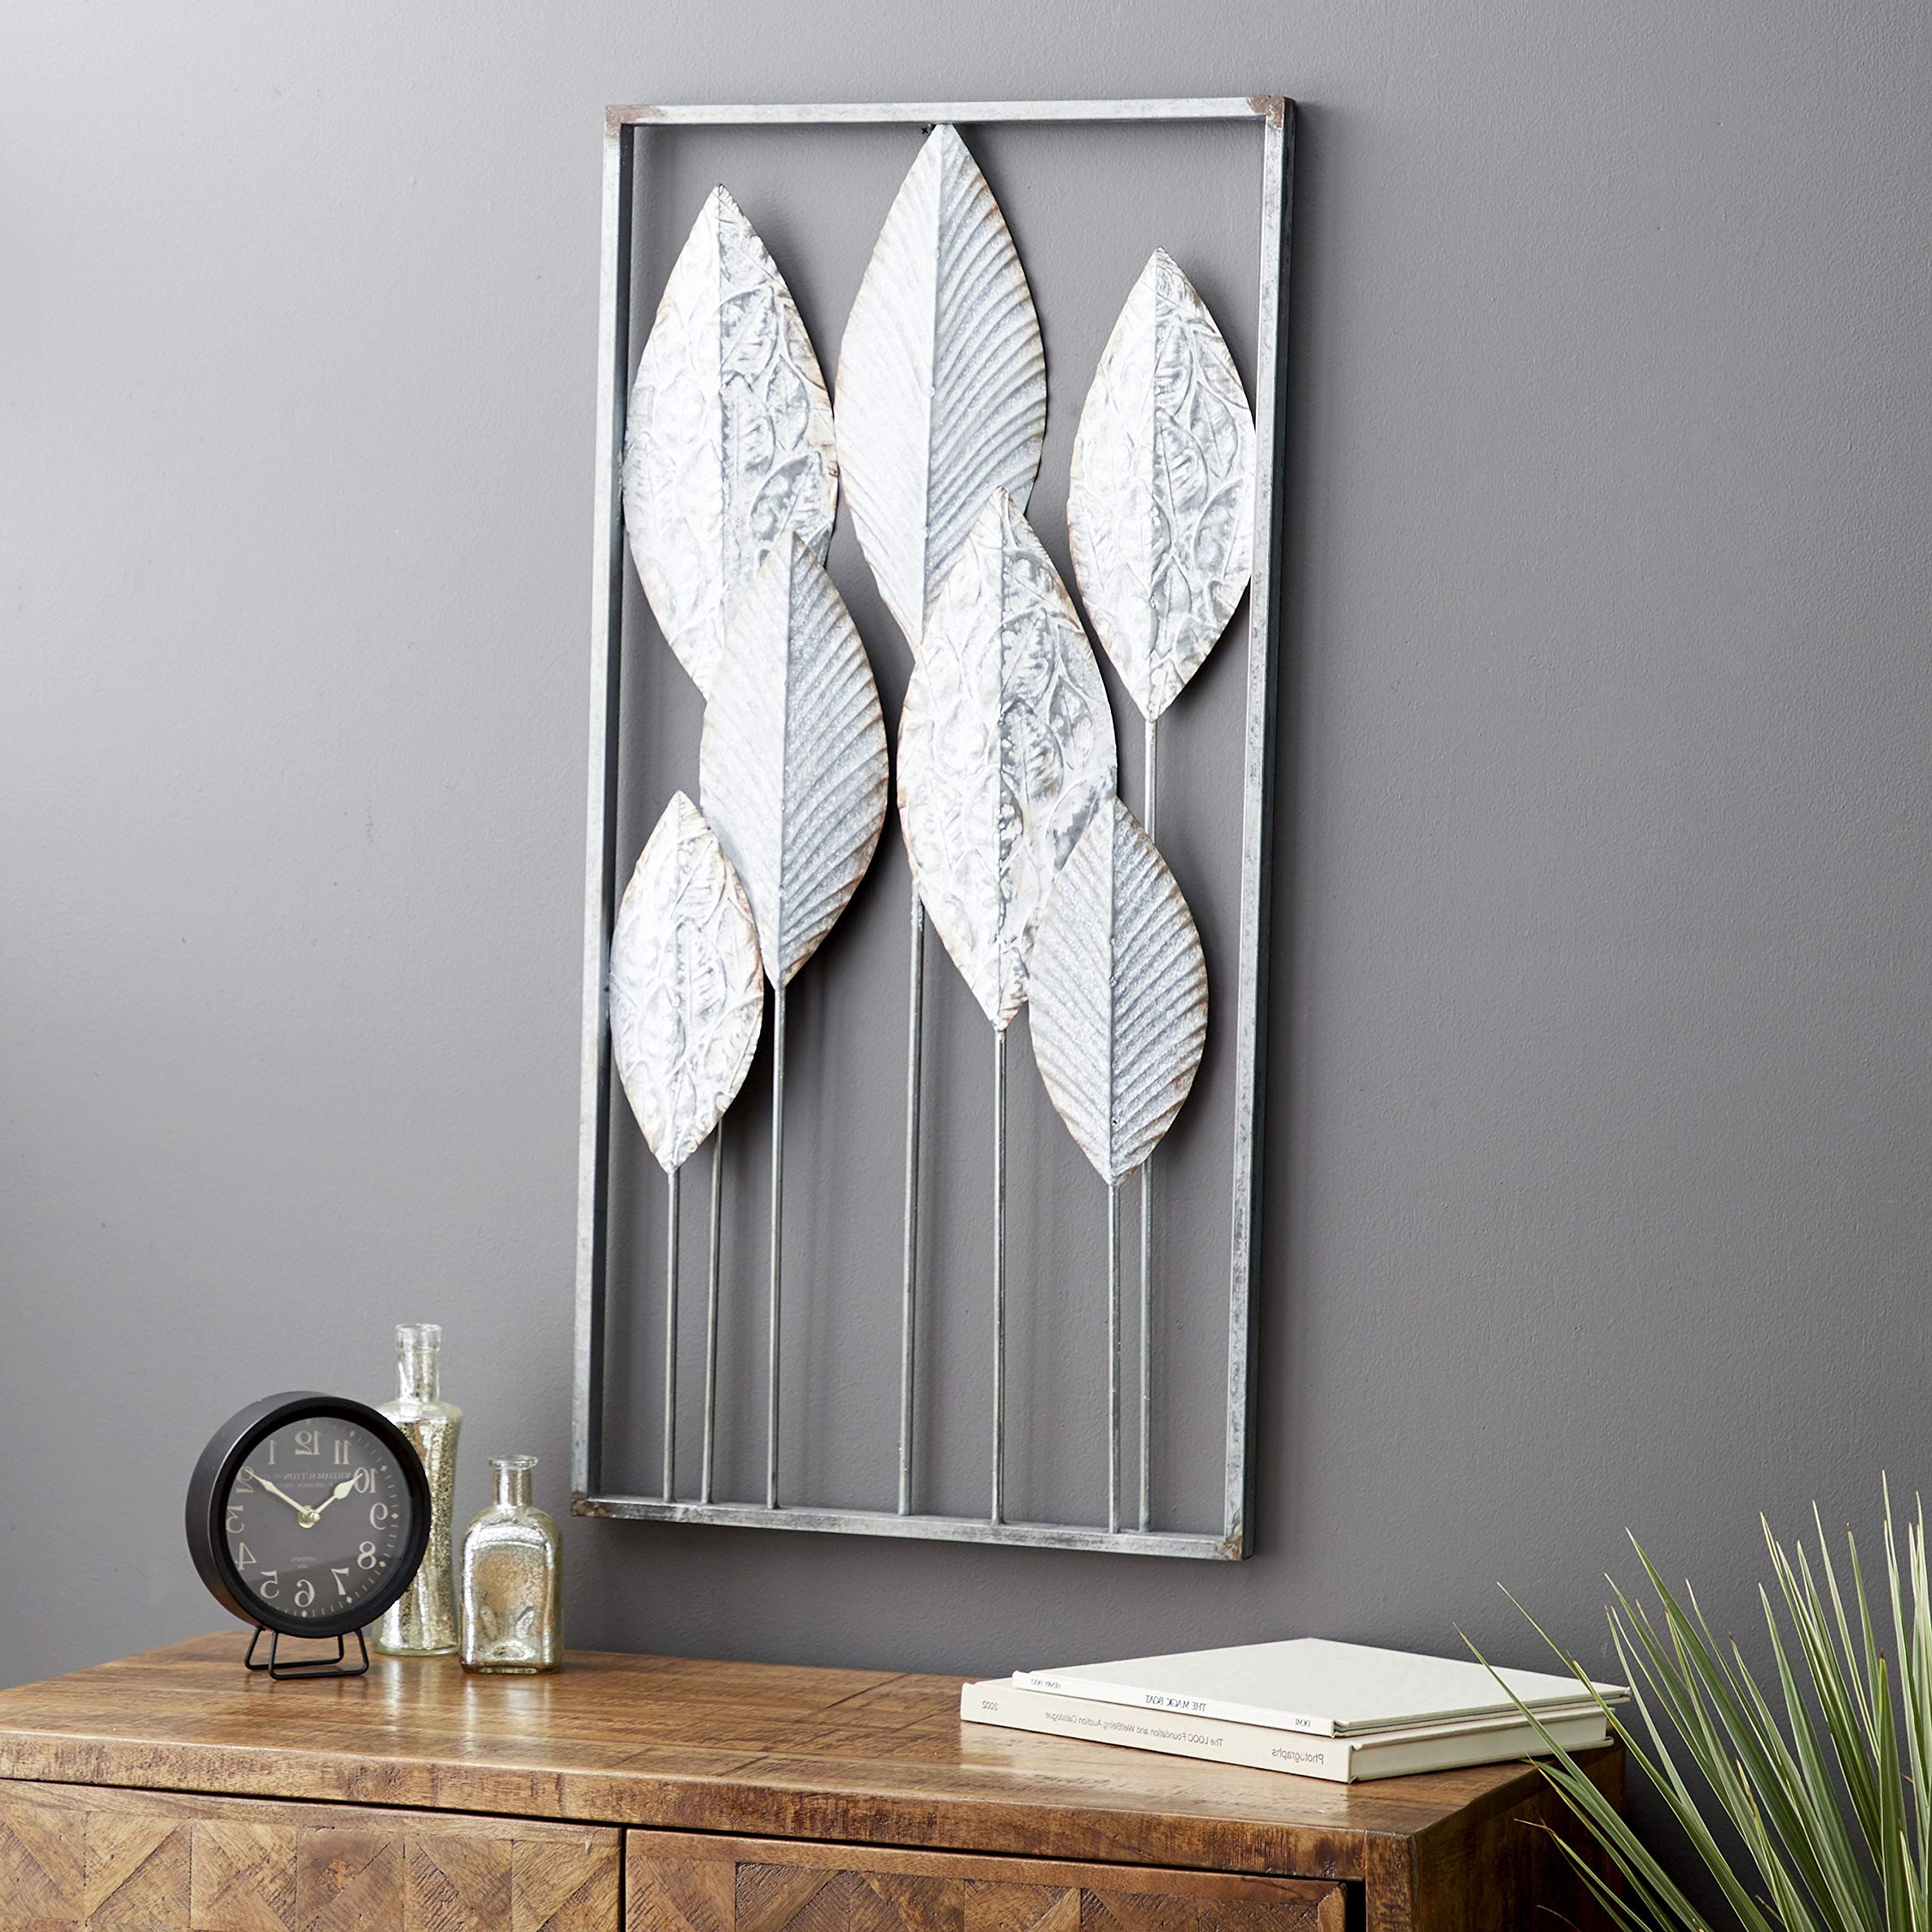 Most Popular Intricate Laser Cut Wall Art Throughout Amazon: Deco 79 Metal Leaf Tall Cut Out Wall Decor With Intricate Laser  Cut Designs, 18" X 2" X 36", Gray : Home & Kitchen (View 2 of 15)